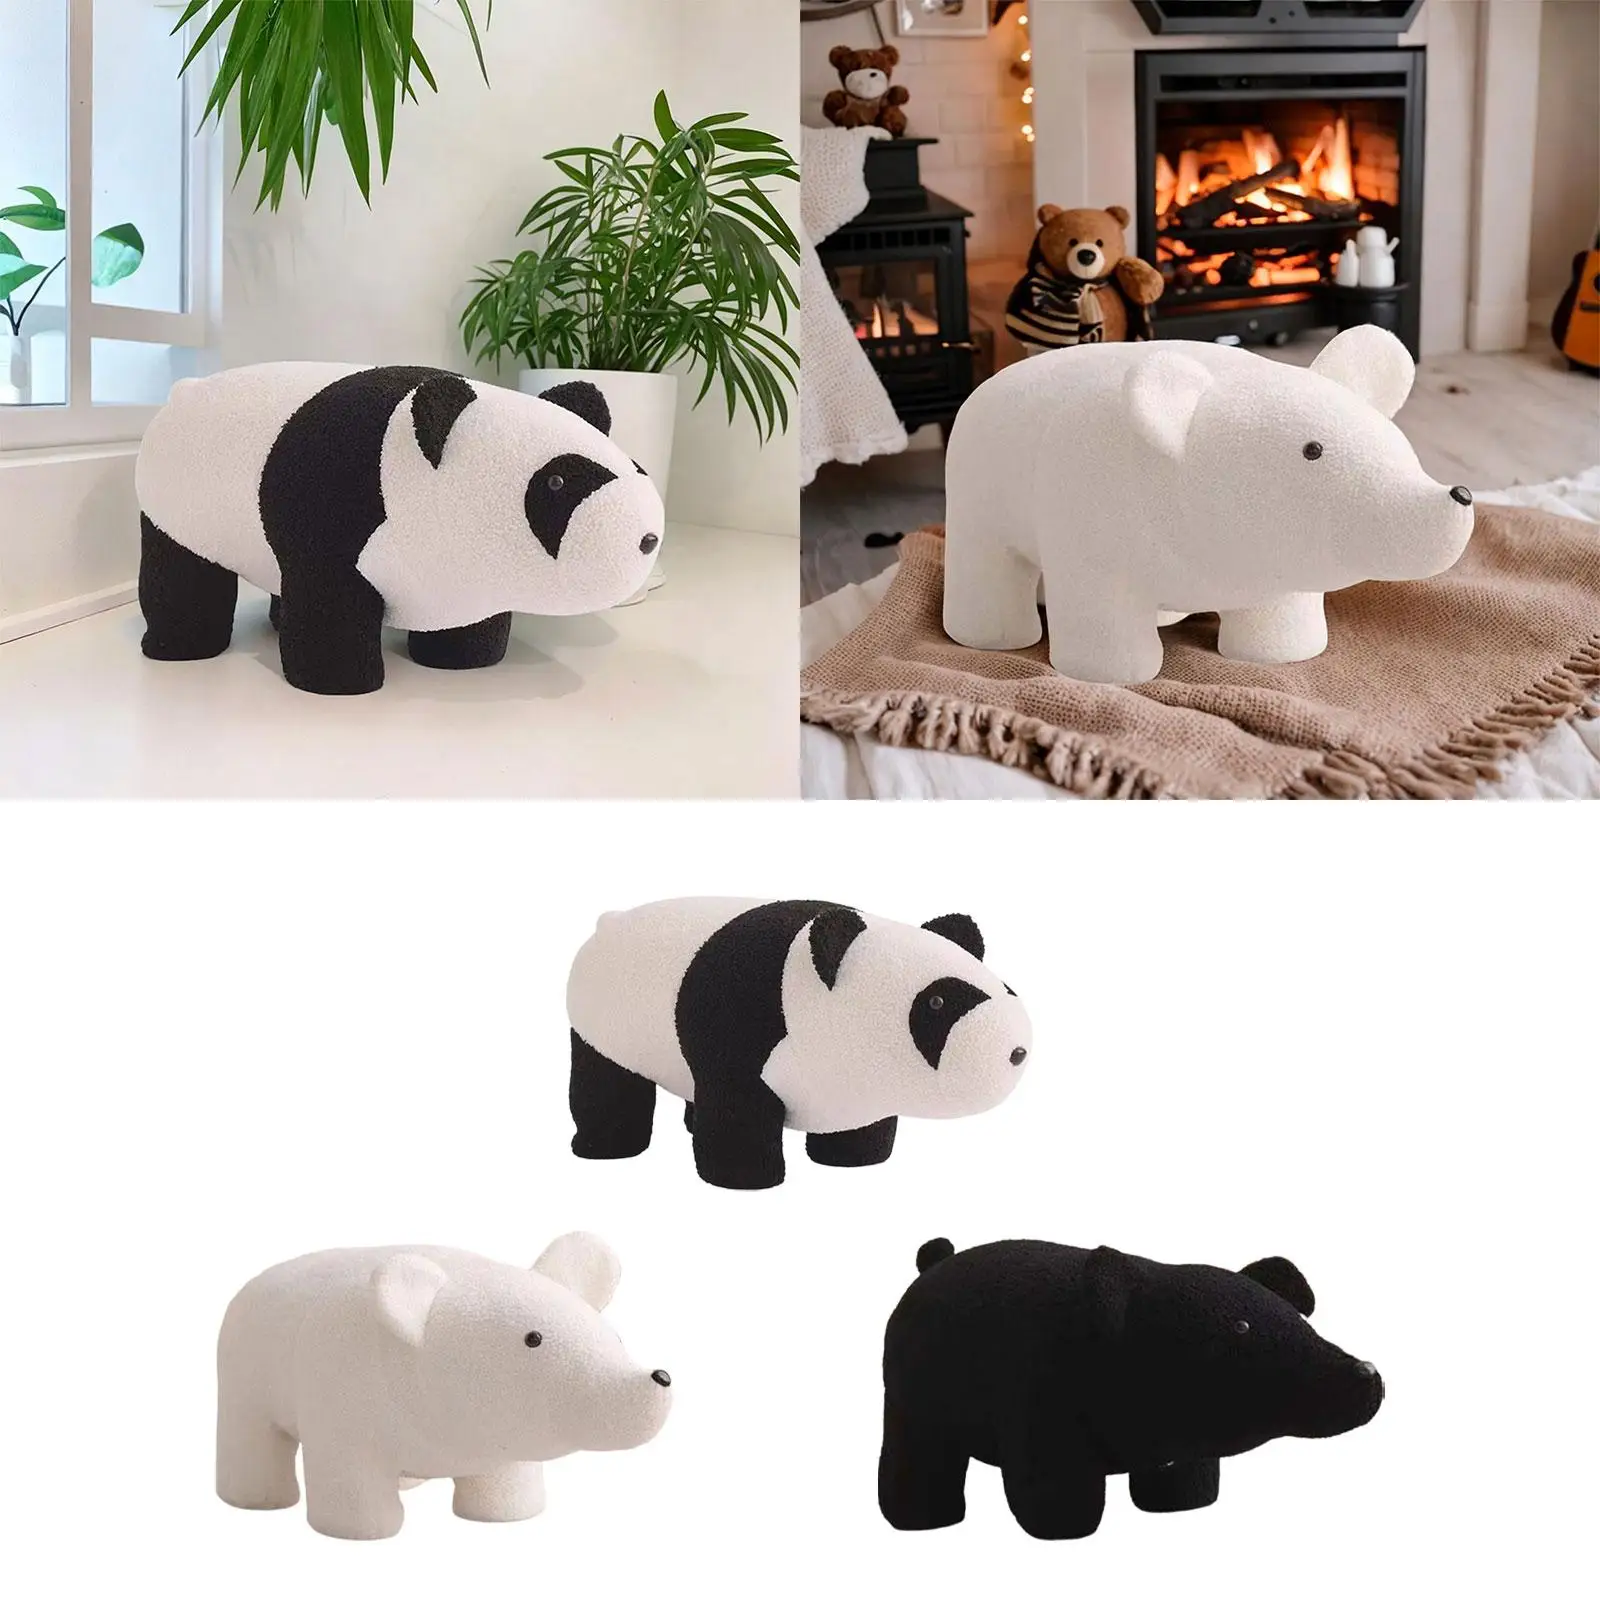 Foot Rest Bedside Kids Gift Anti Slip Cute Animal Footstools Animal Shaped Foot Stool Small Footstool Ottoman for Home Entryway